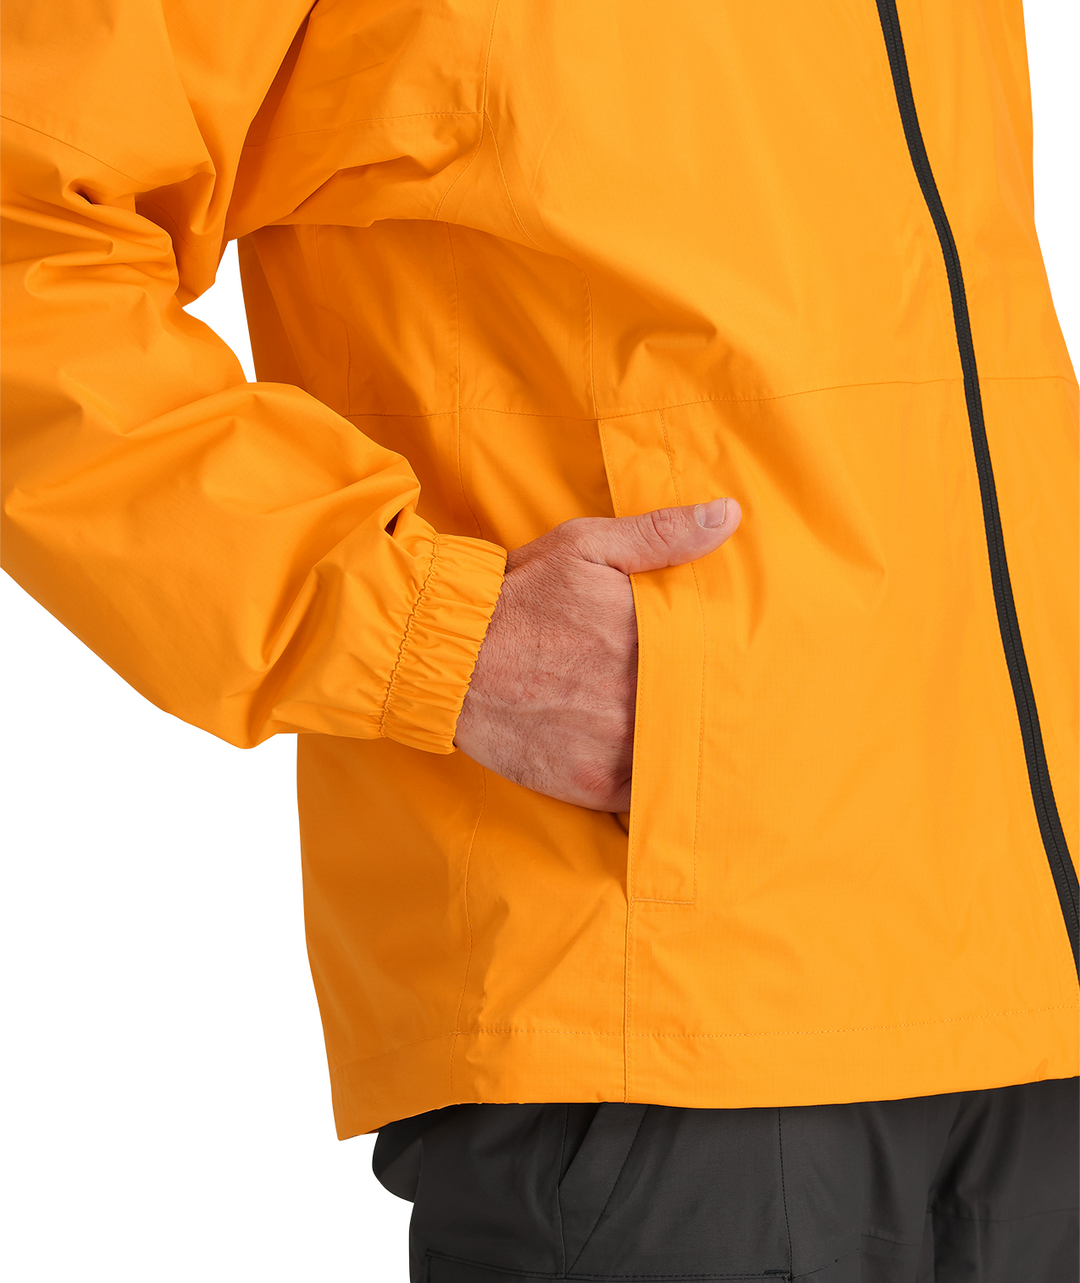 The North Face Men's Build Up Jacket Summit Gold